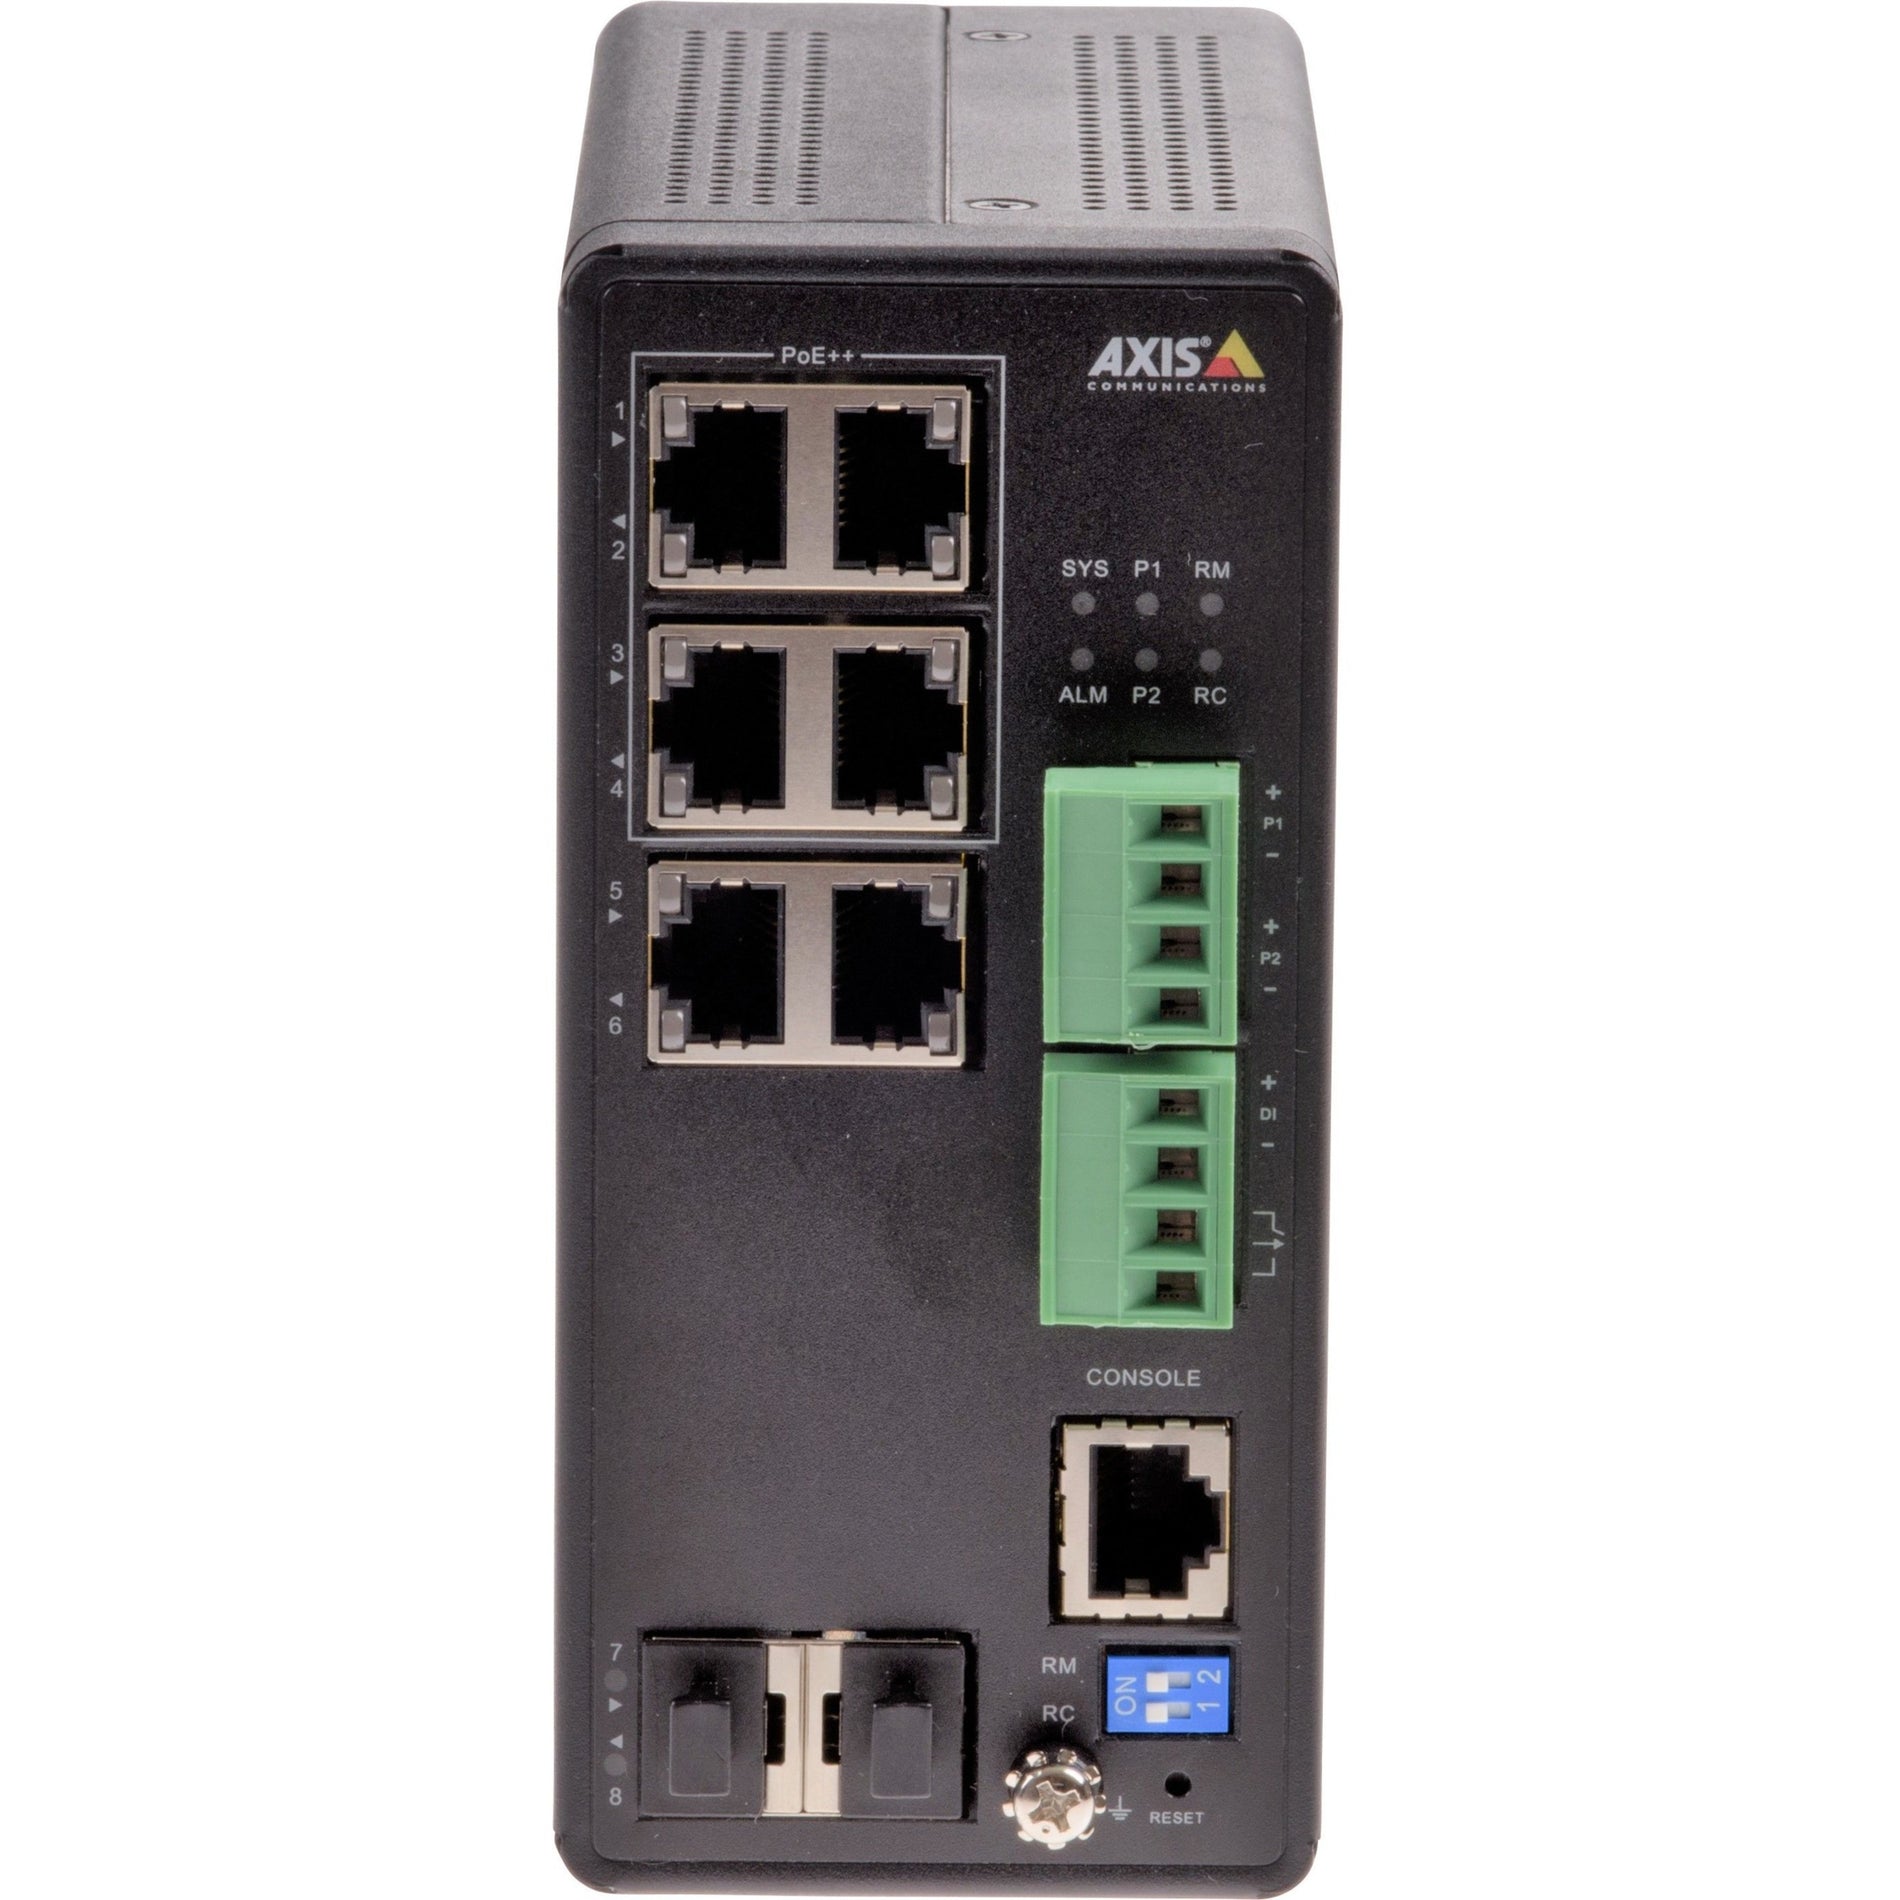 AXIS 01633-001 T8504-R Industrial PoE Switch, 4-Port Gigabit Ethernet Power Injector